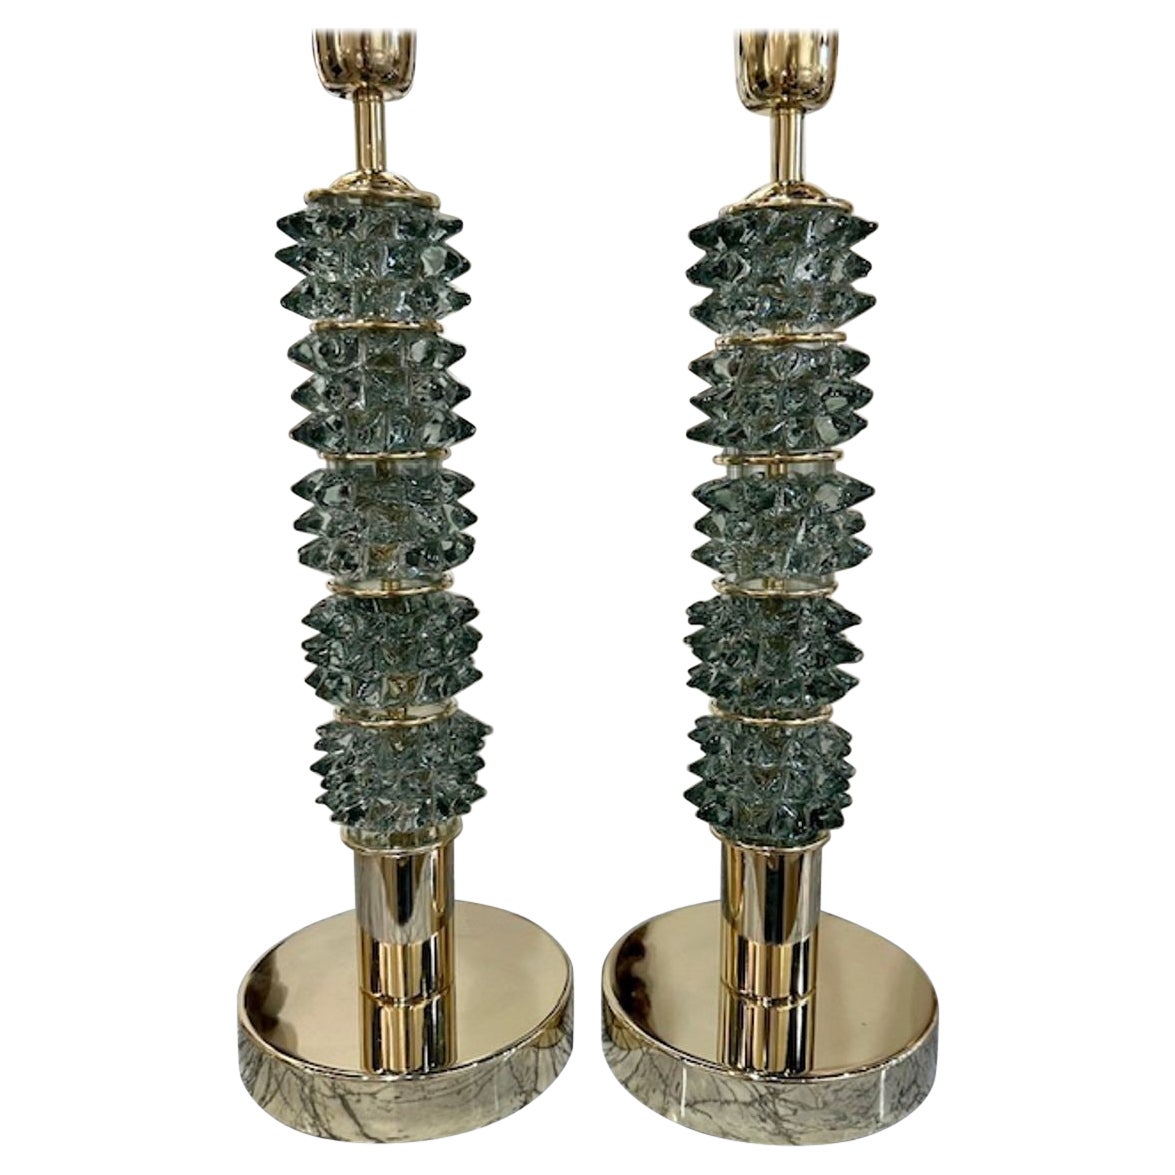 Pair of Modern Glass and Brass "Rostri" Lamps in Fontana Green